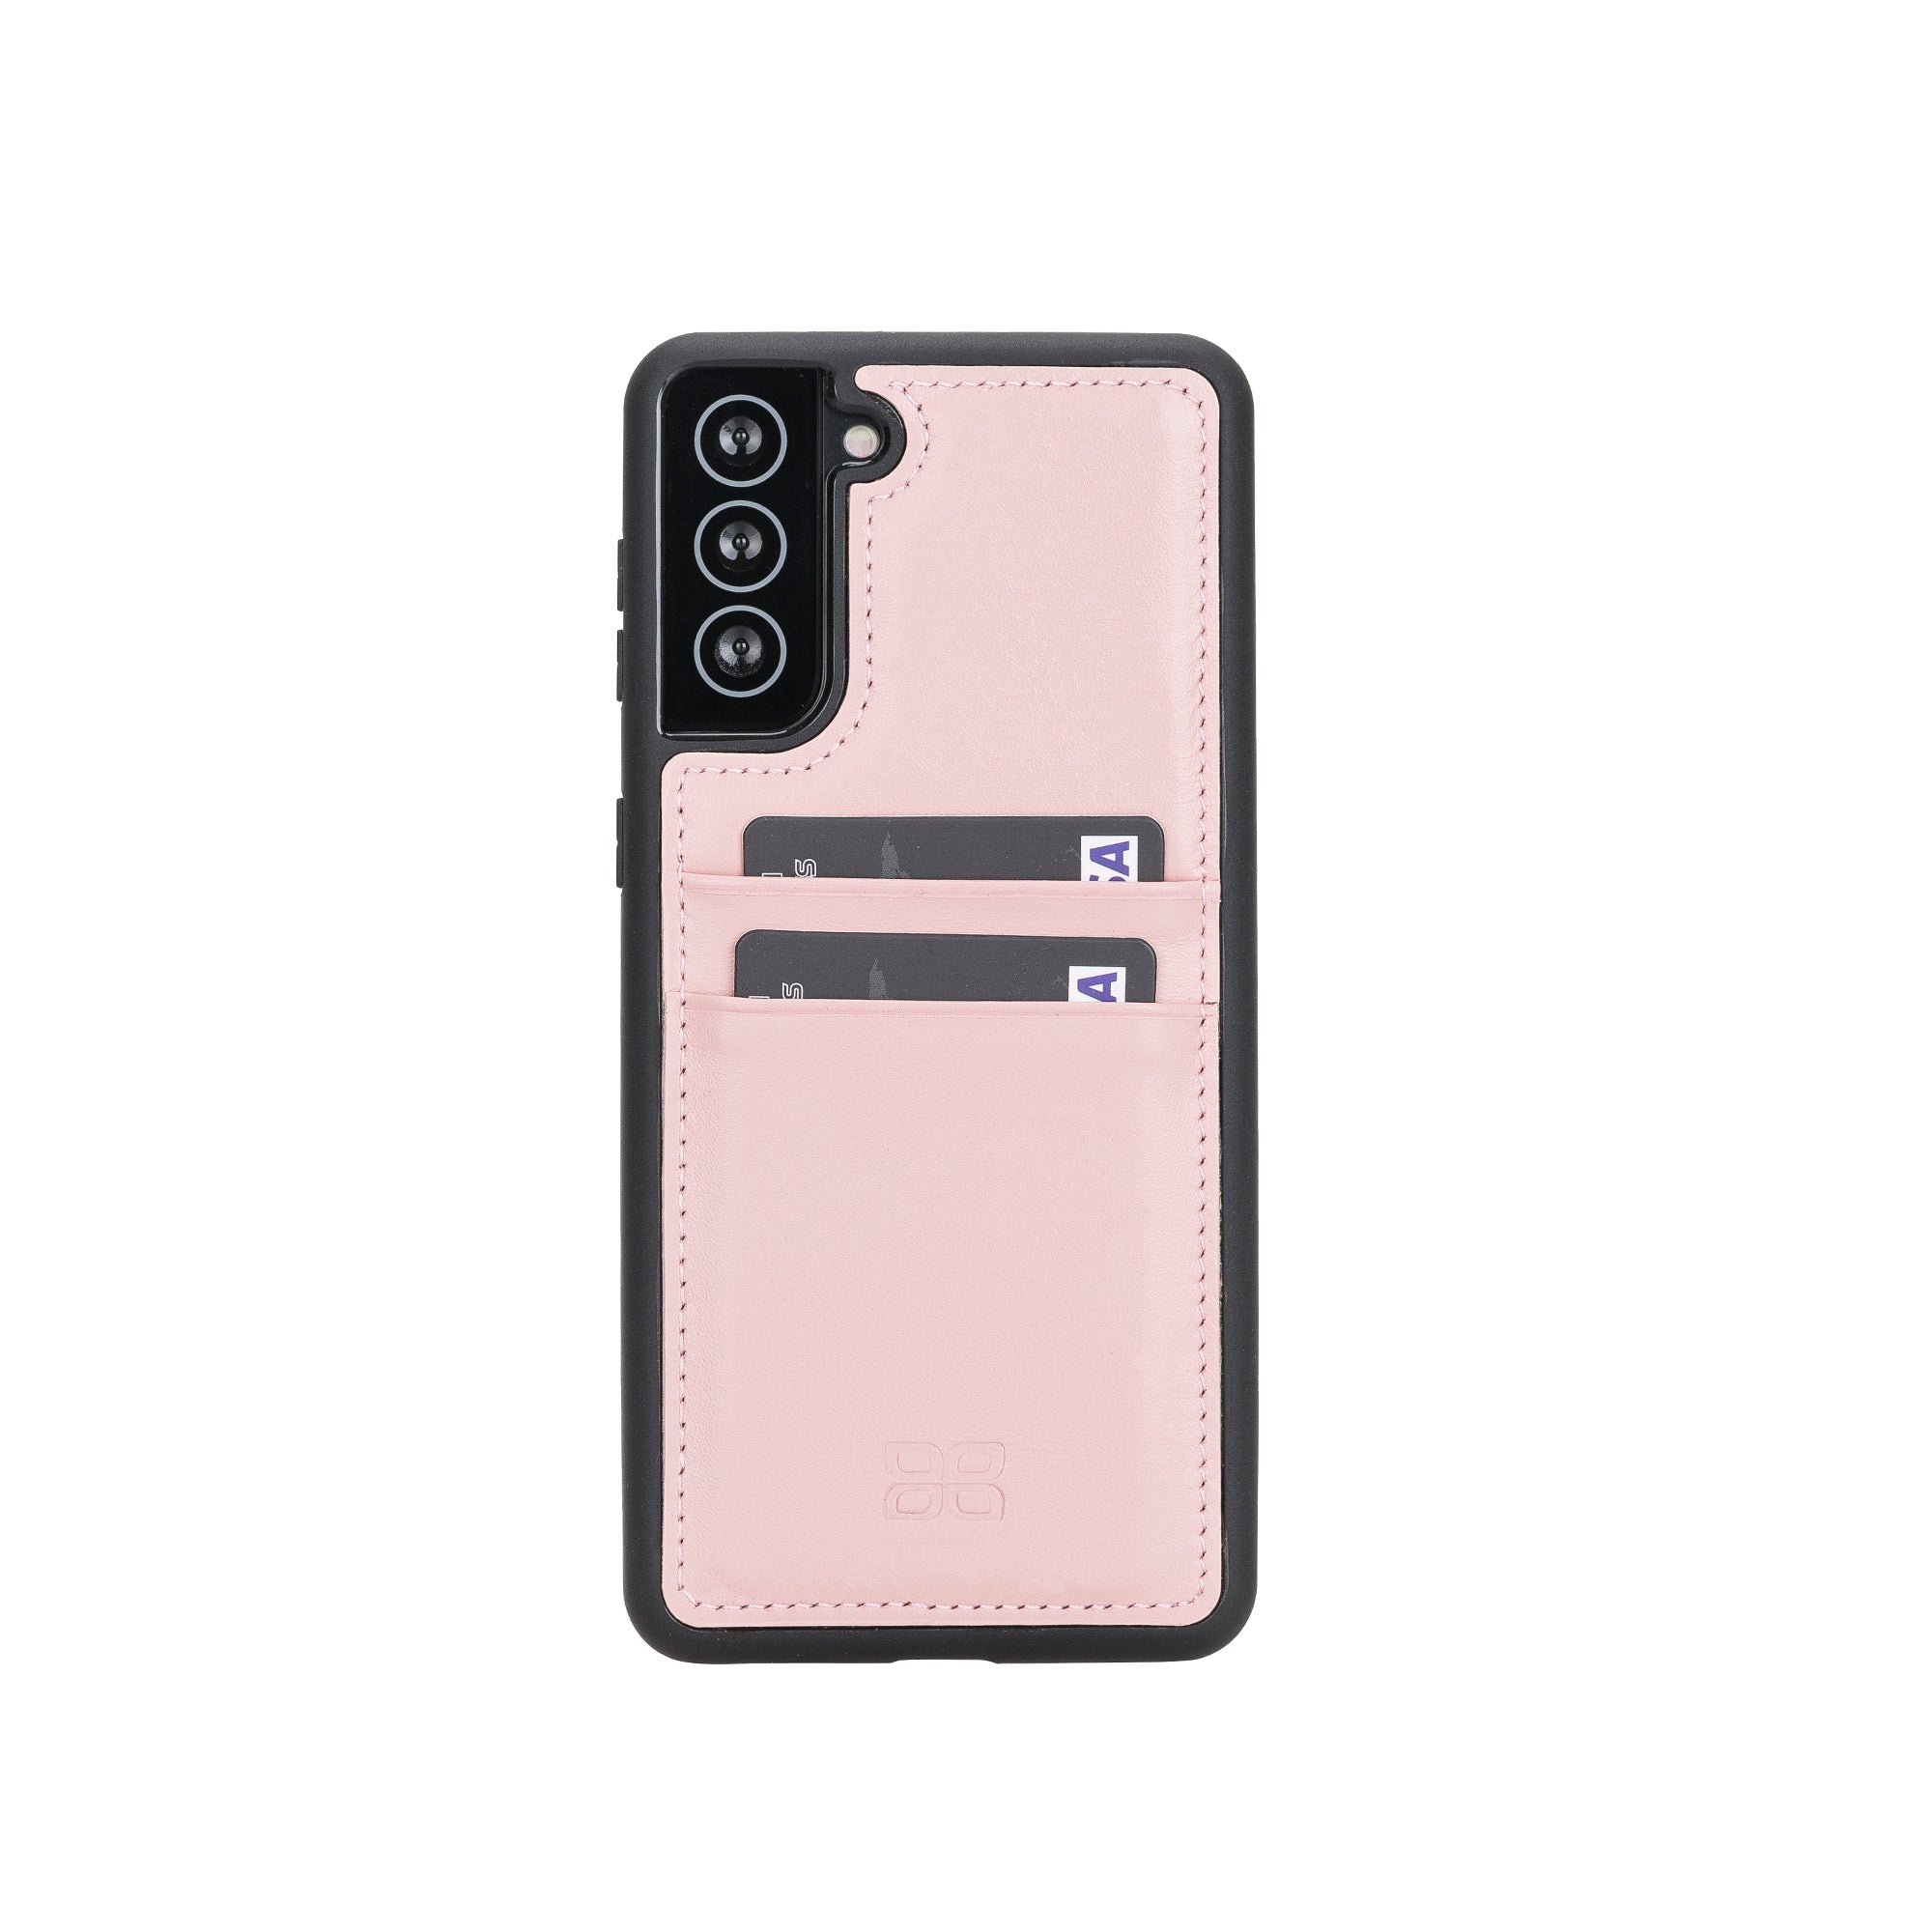 Flex Cover Leather Back Case with Card Holder for Samsung Galaxy S21 Plus 5G (6.7") - PINK - saracleather